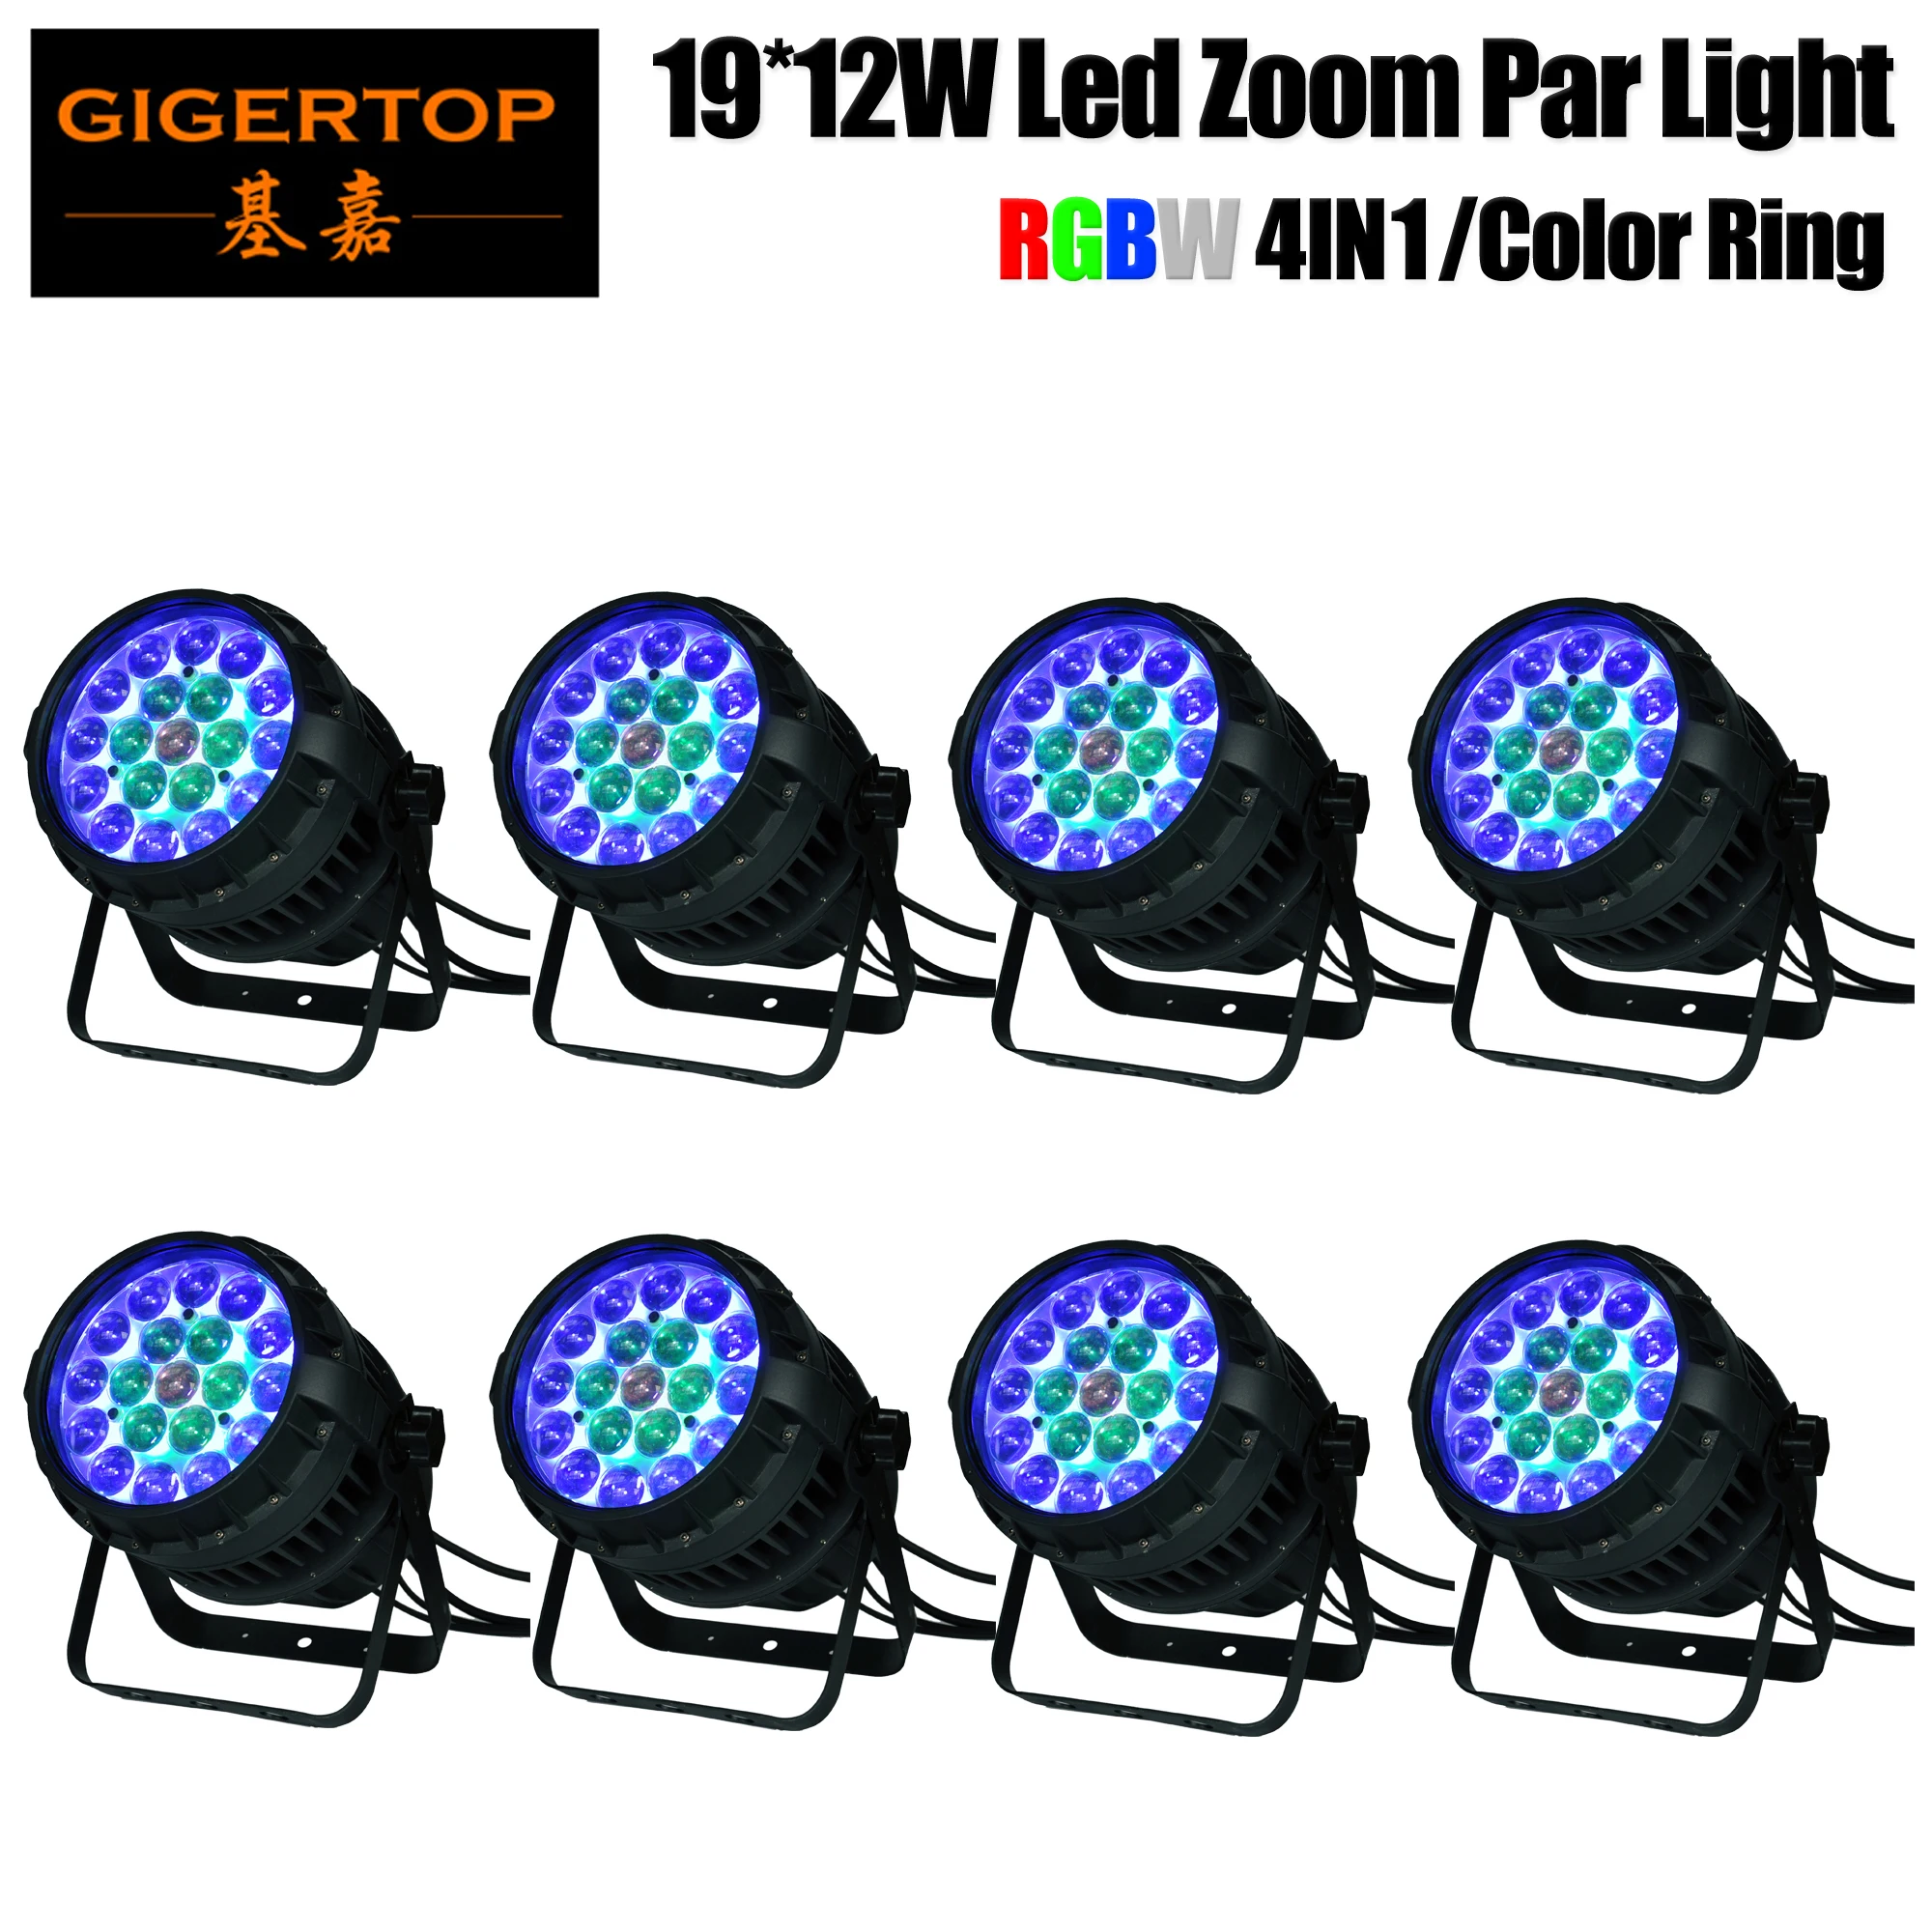 

Discount Price 8 Units 230W High Power Waterproof Led Zoom Par Light 19 x 12W RGBW 4IN1 Pixel Color IP65 Outdoor Par Cans